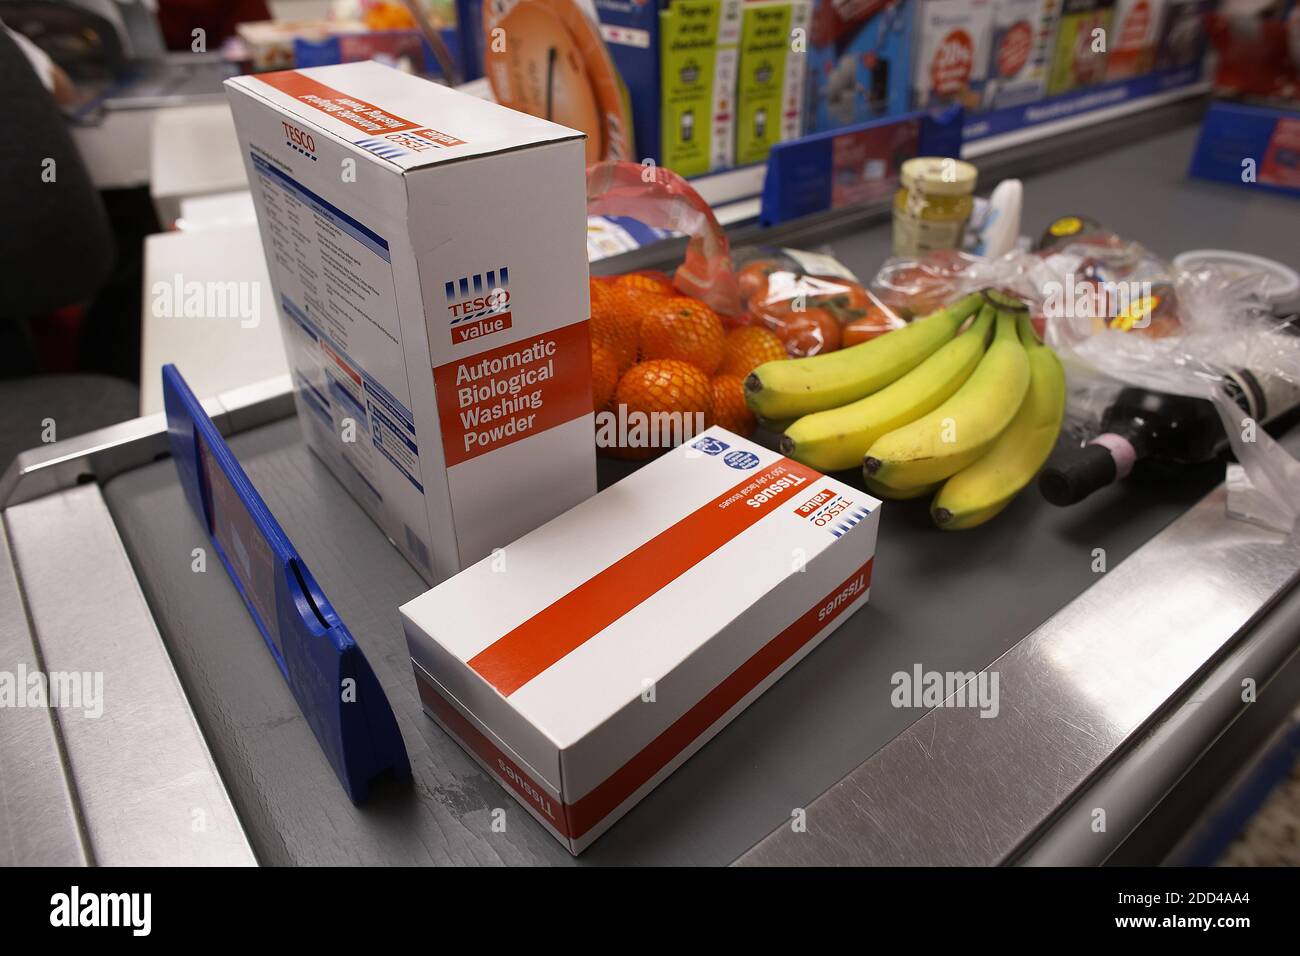 GREAT BRITAIN / England/shoppings on supermarket check out conveyor belt . Stock Photo